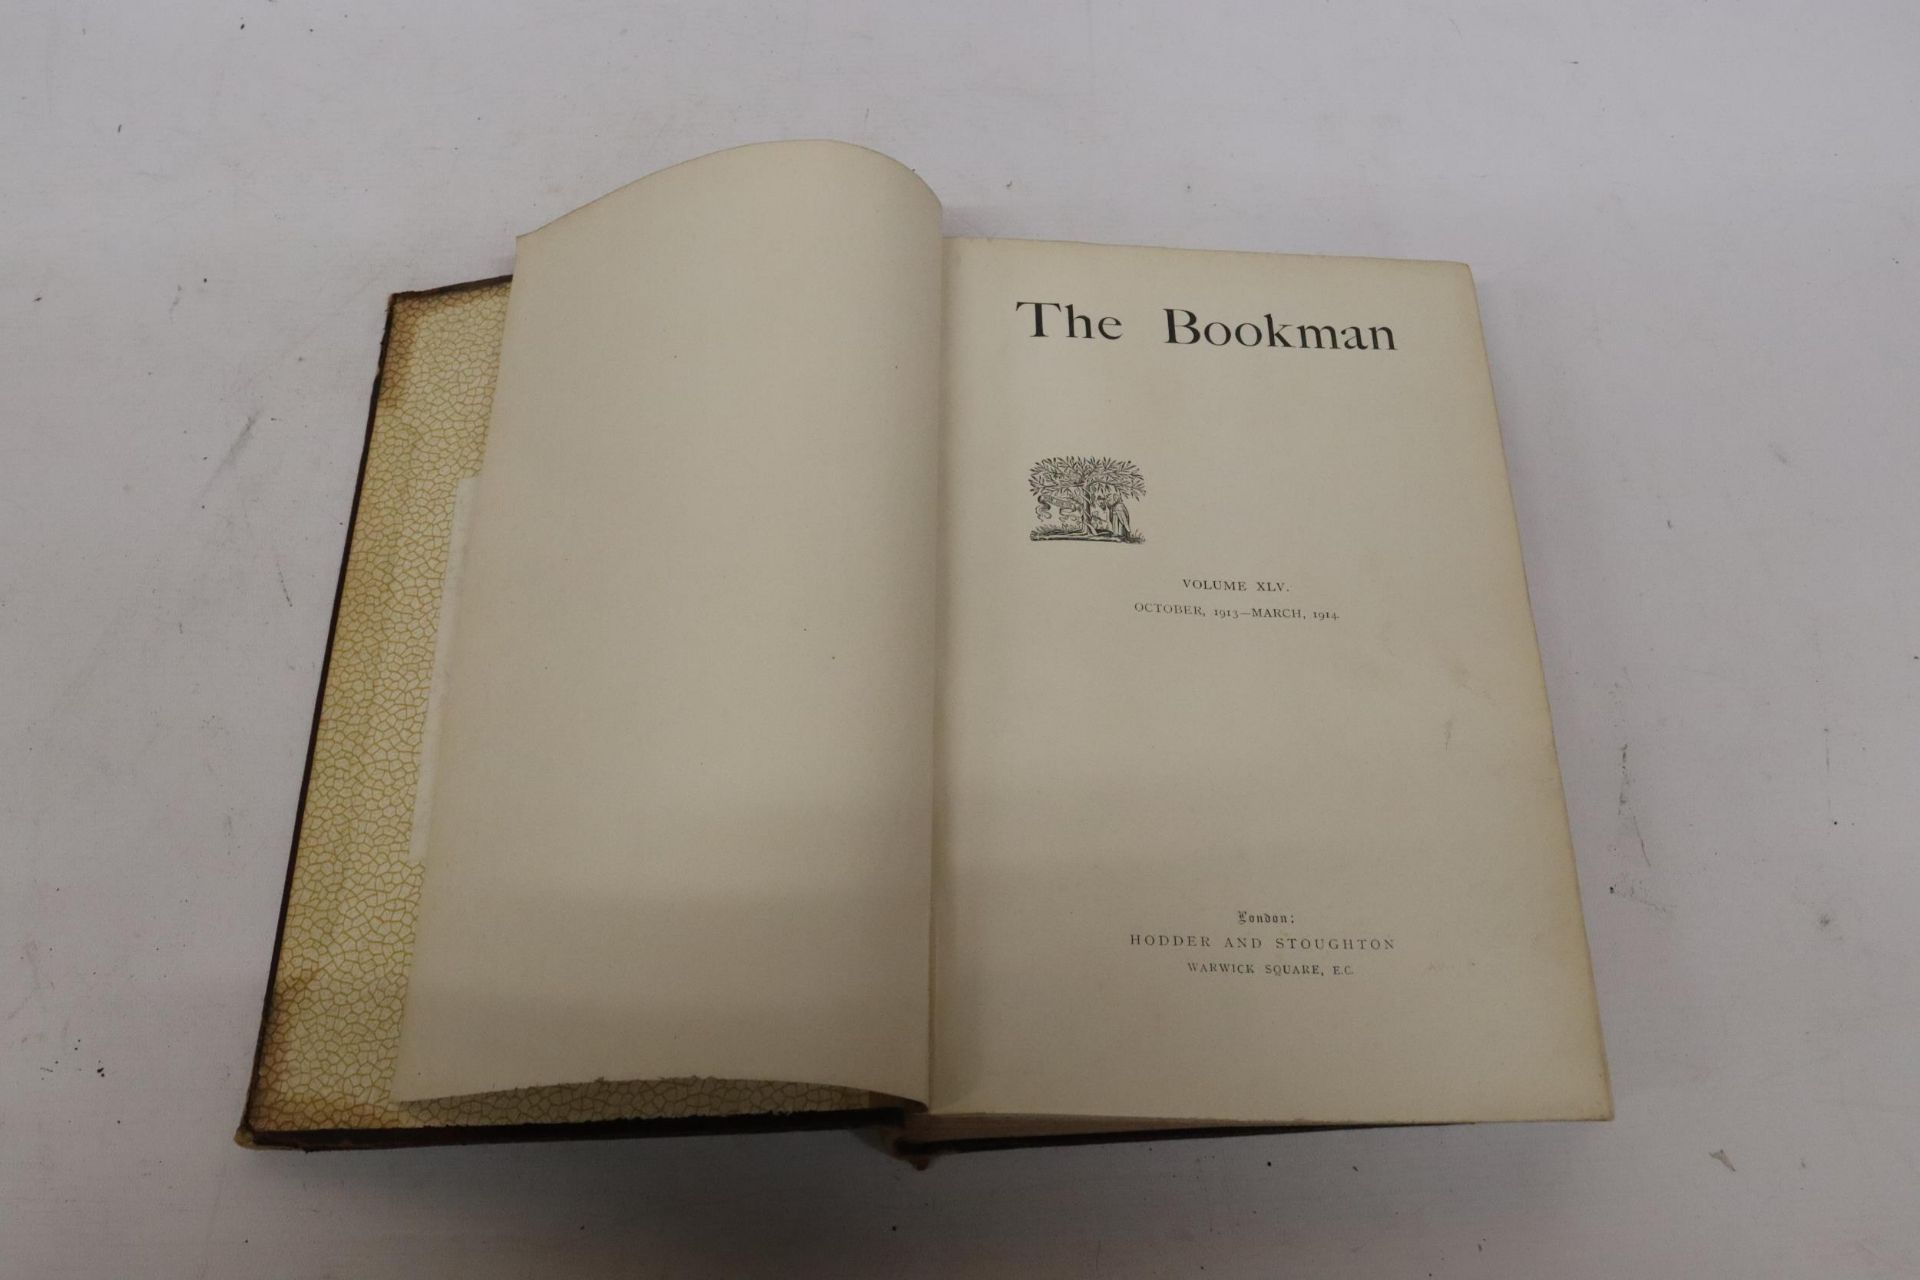 TWO LARGE VOLUMES OF "THE BOOKMAN" 1913-1914 AND 1918-1919 - Image 6 of 8